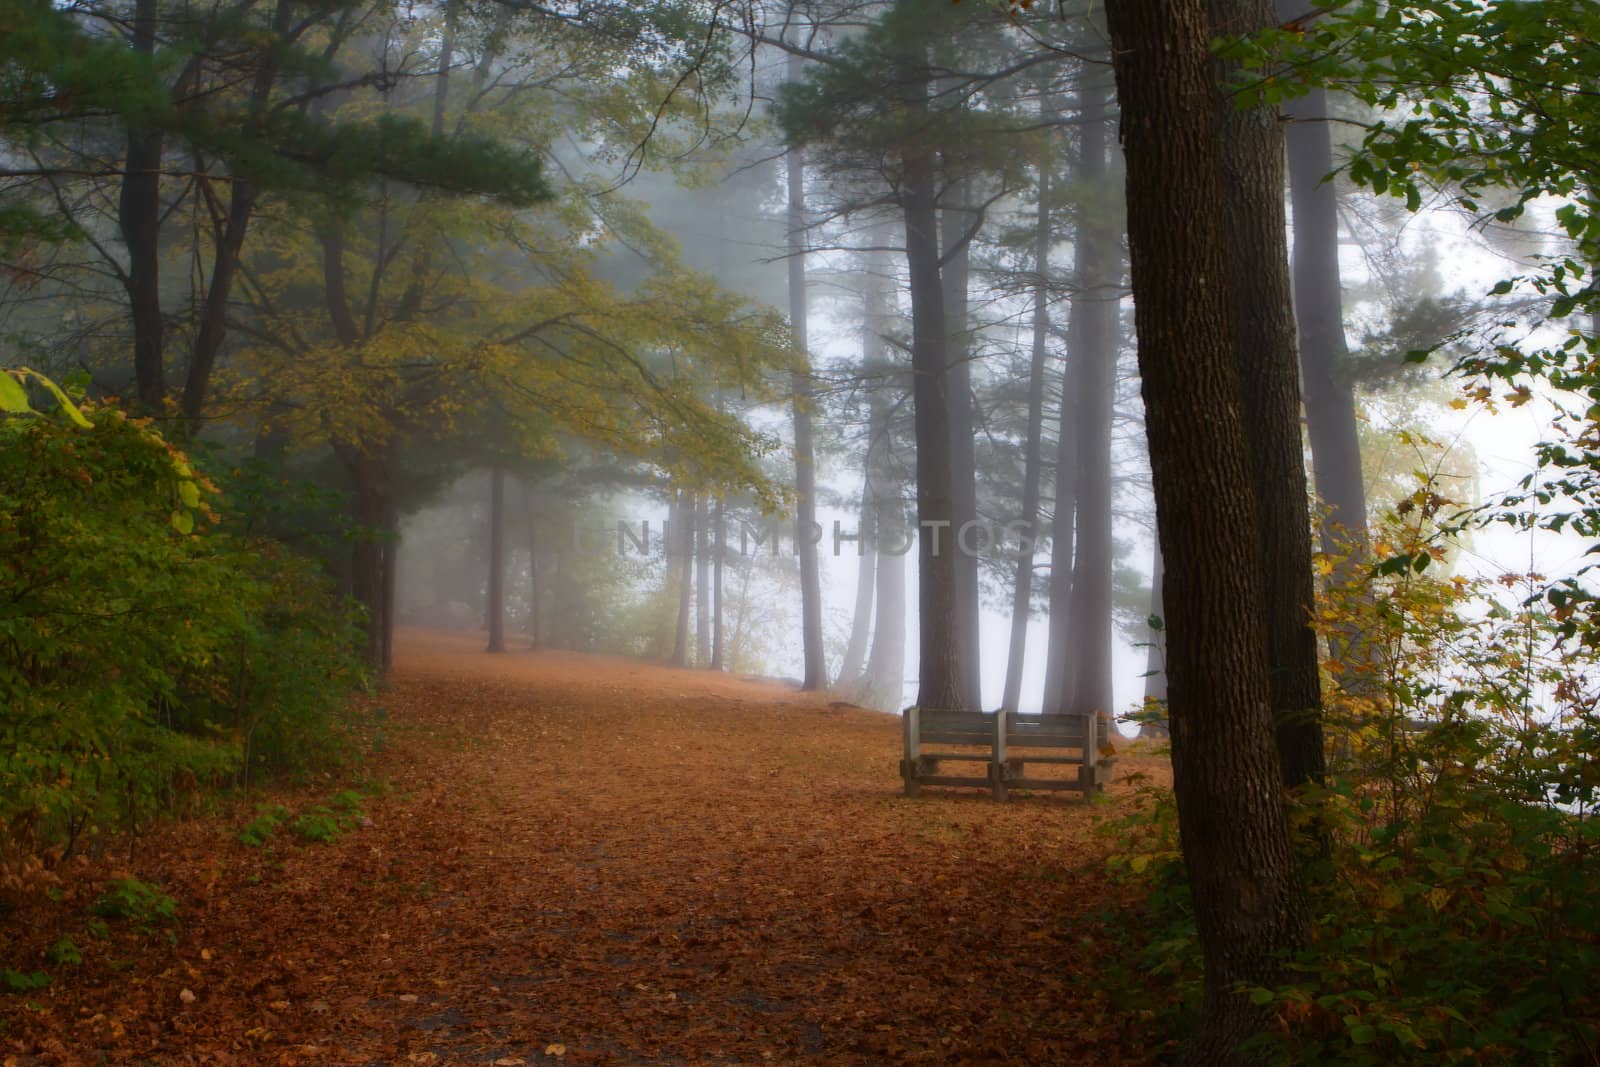 Bench in the Forest Foliage by Coffee999